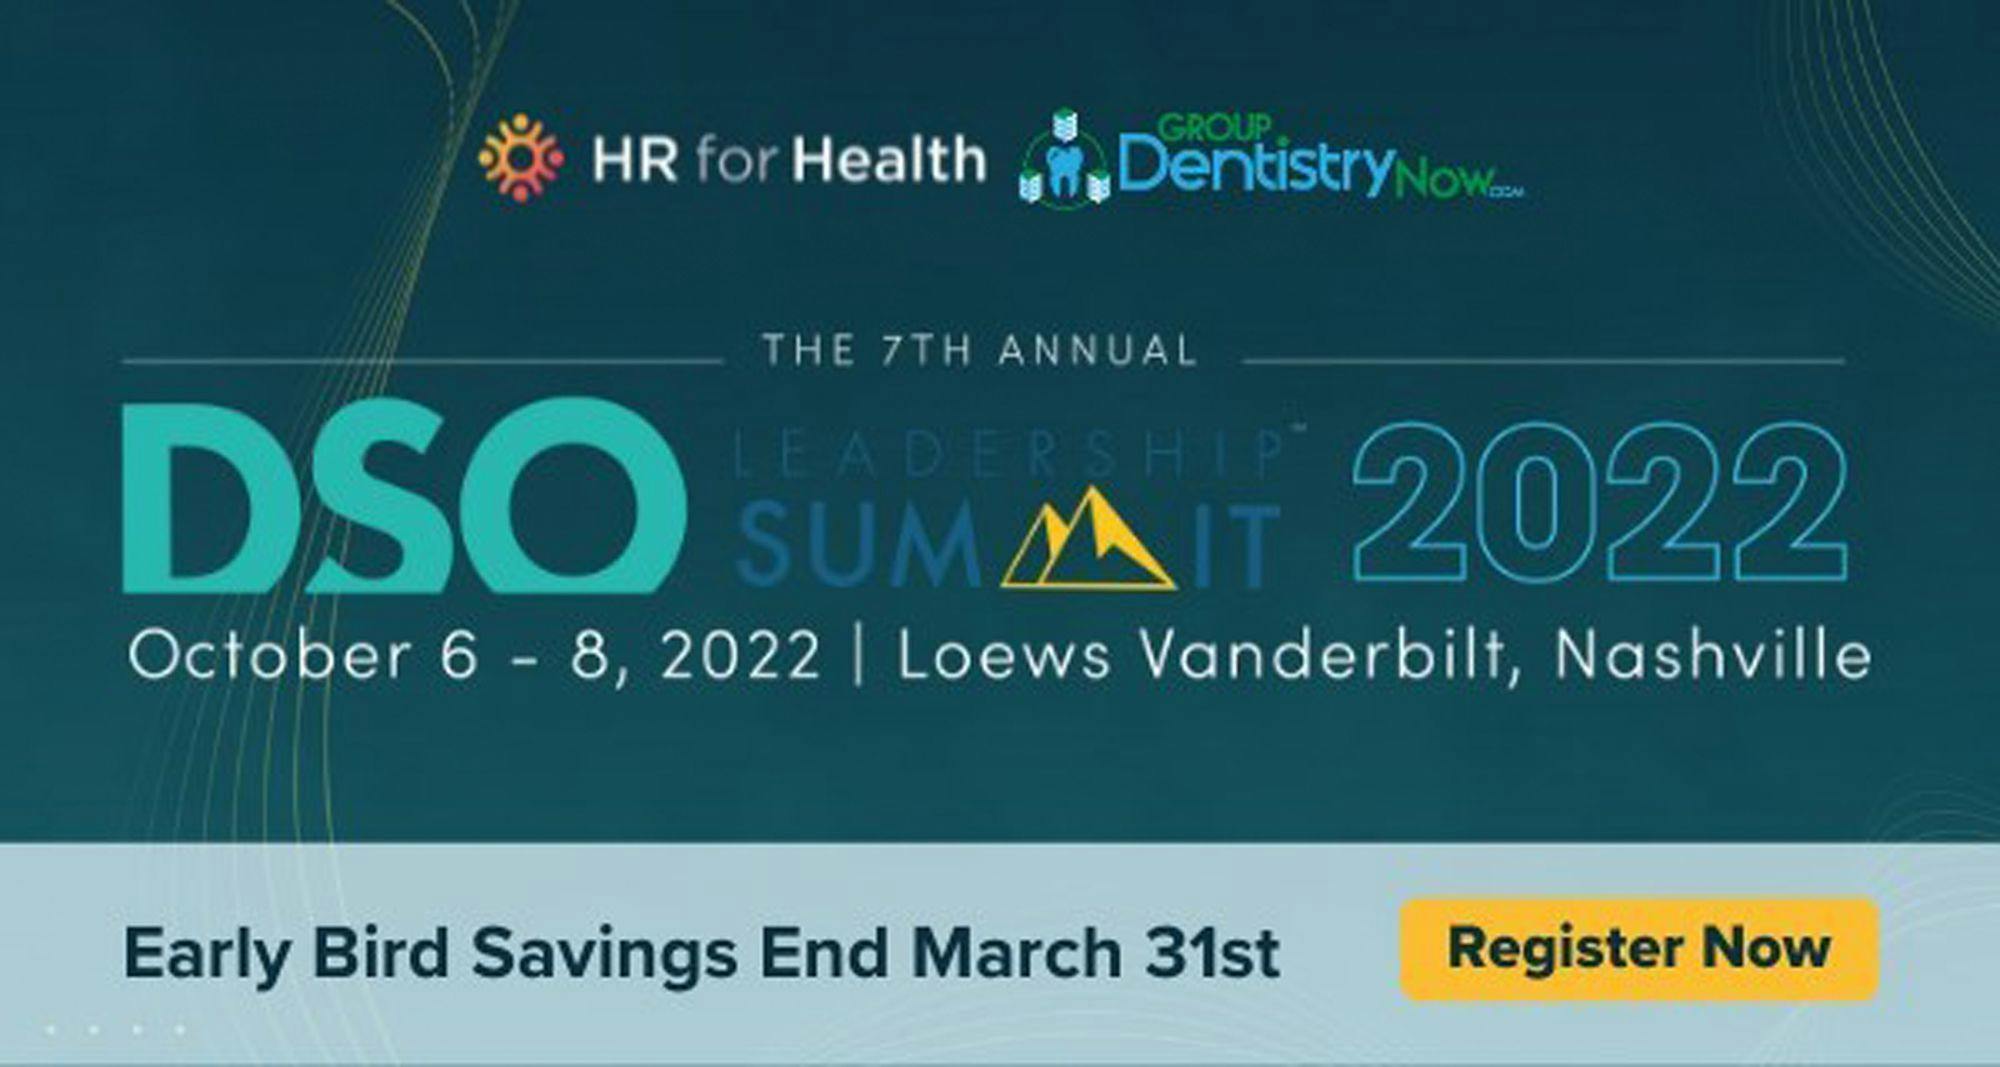 HR for Health and Group Dentistry Now Opens Registration for Annual DSO Leadership Summit